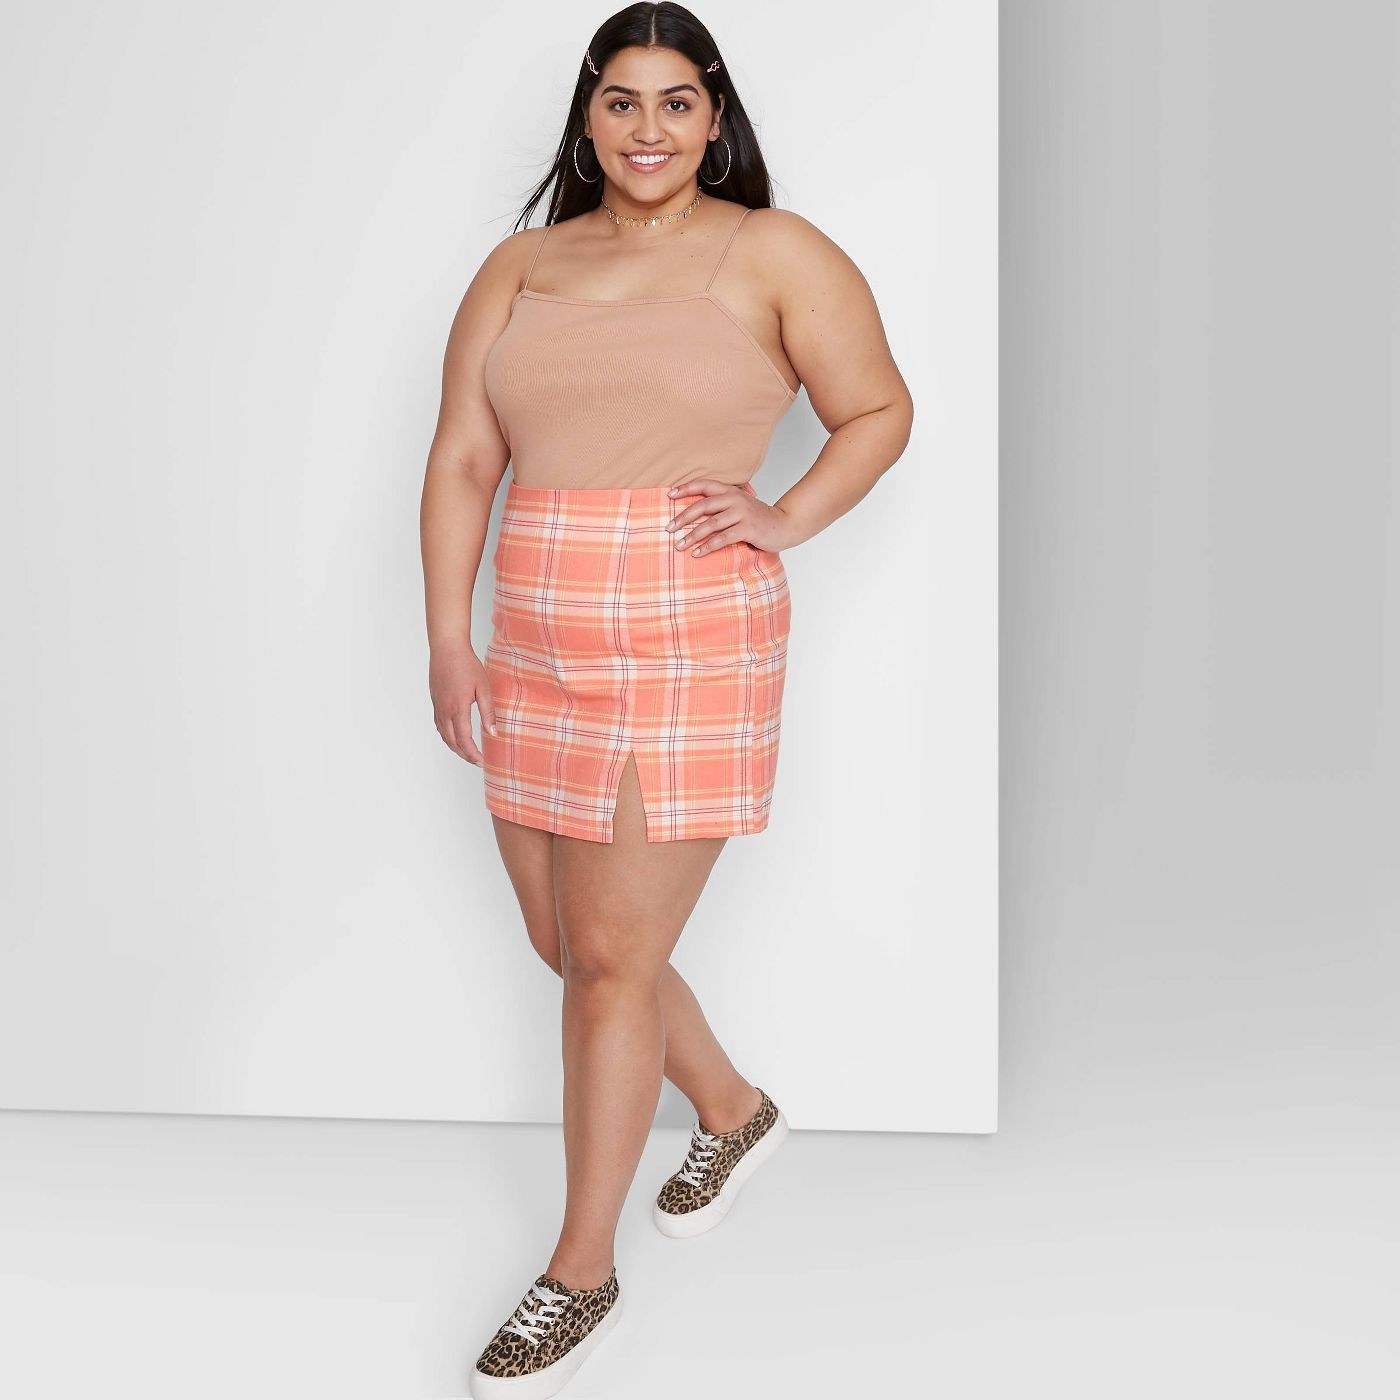 a person in the skirt, which is a coral-pink and white plaid